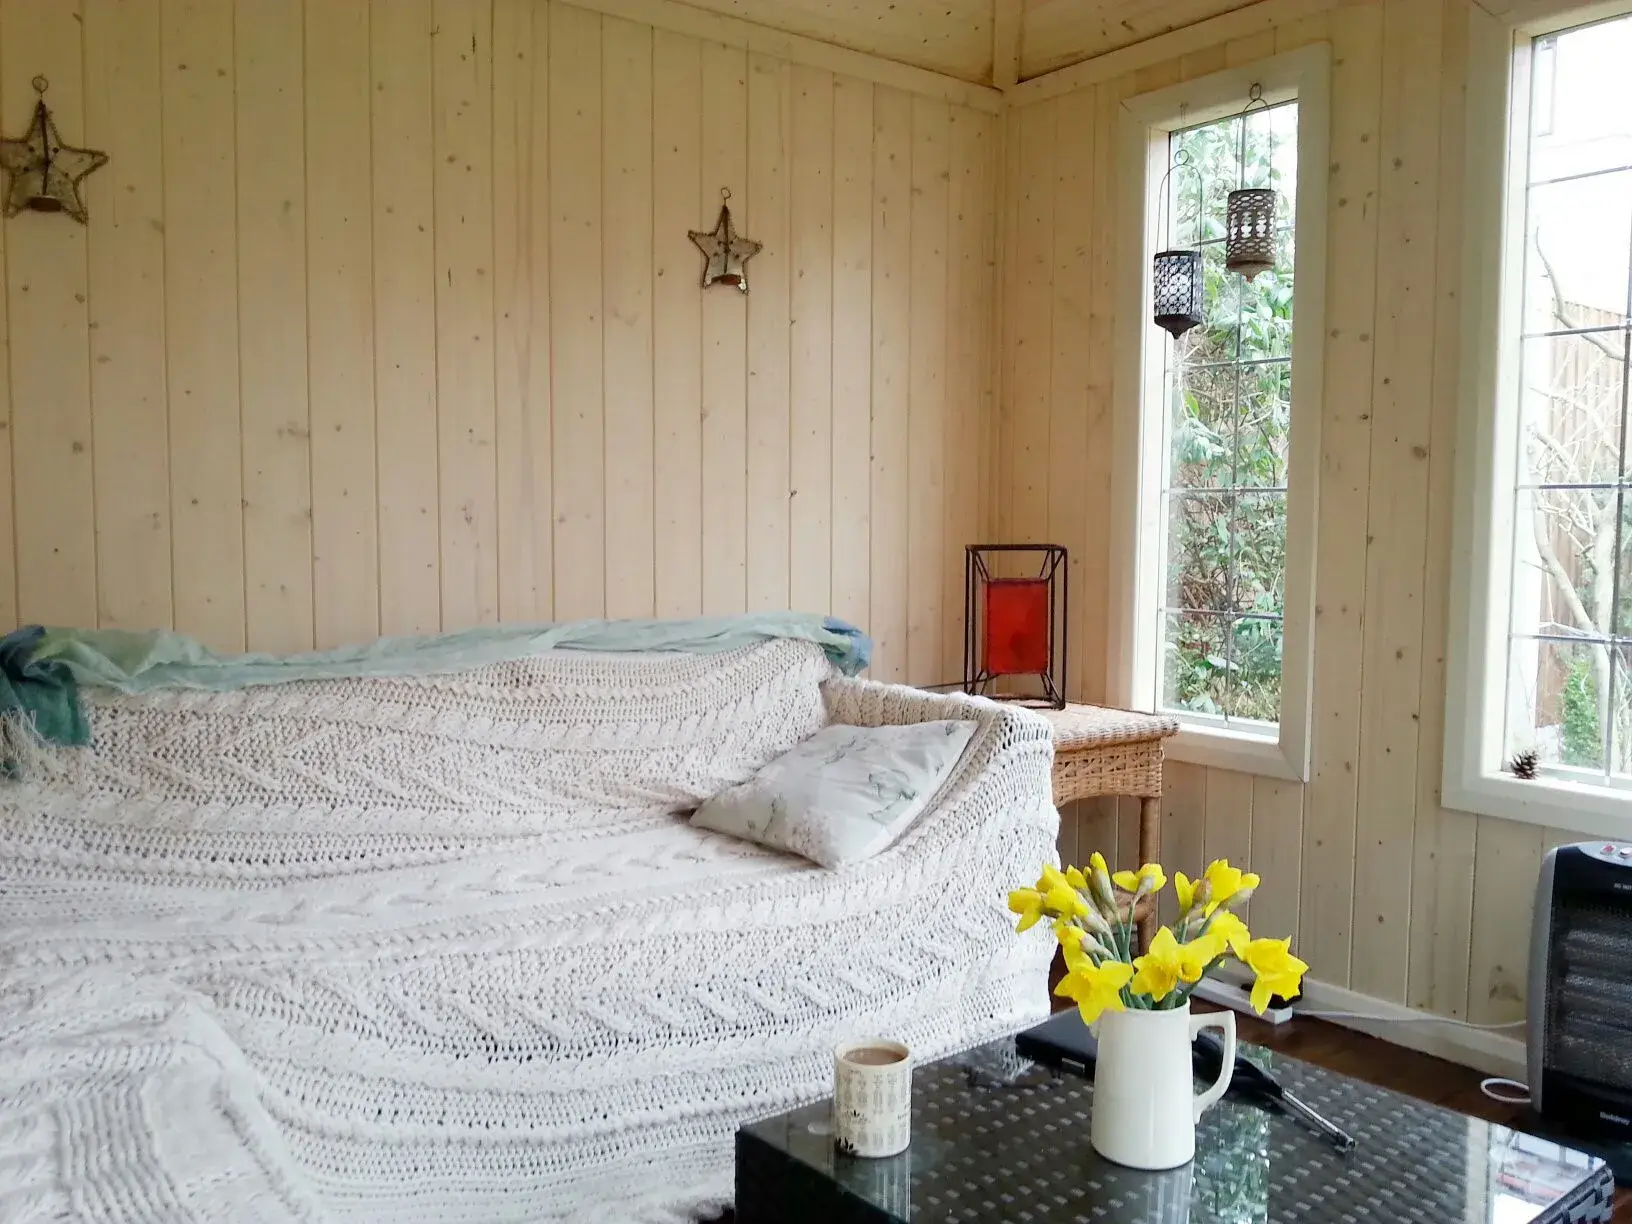 this photo shows an interior view of a lined and insulated corner summerhouse